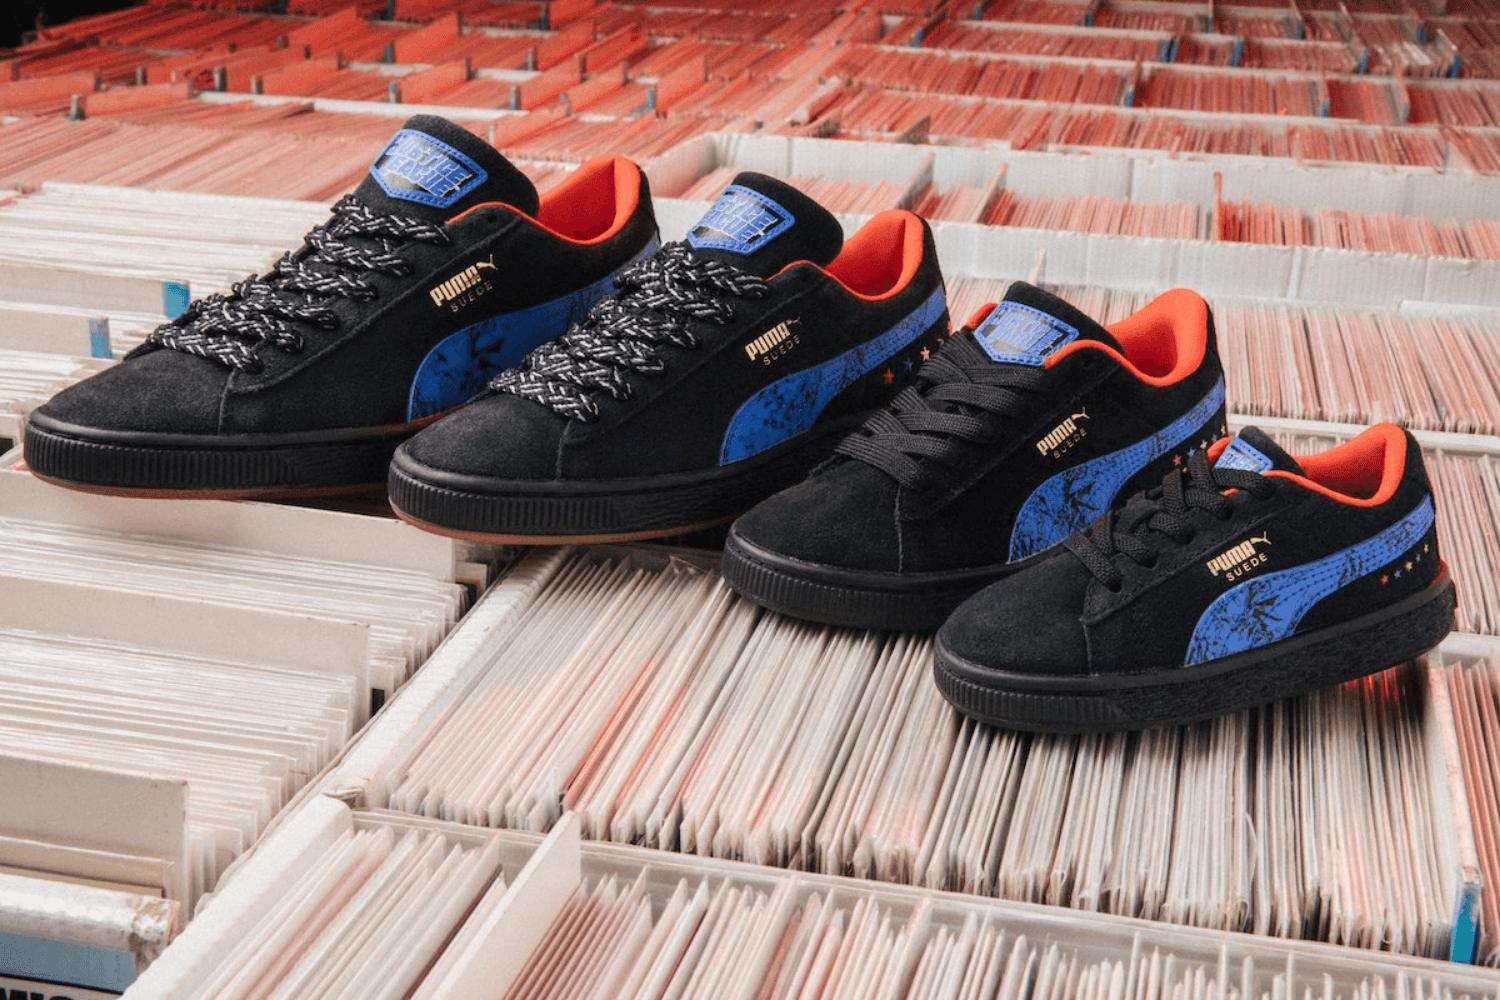 Take a look at the DC Justice League x PUMA collection